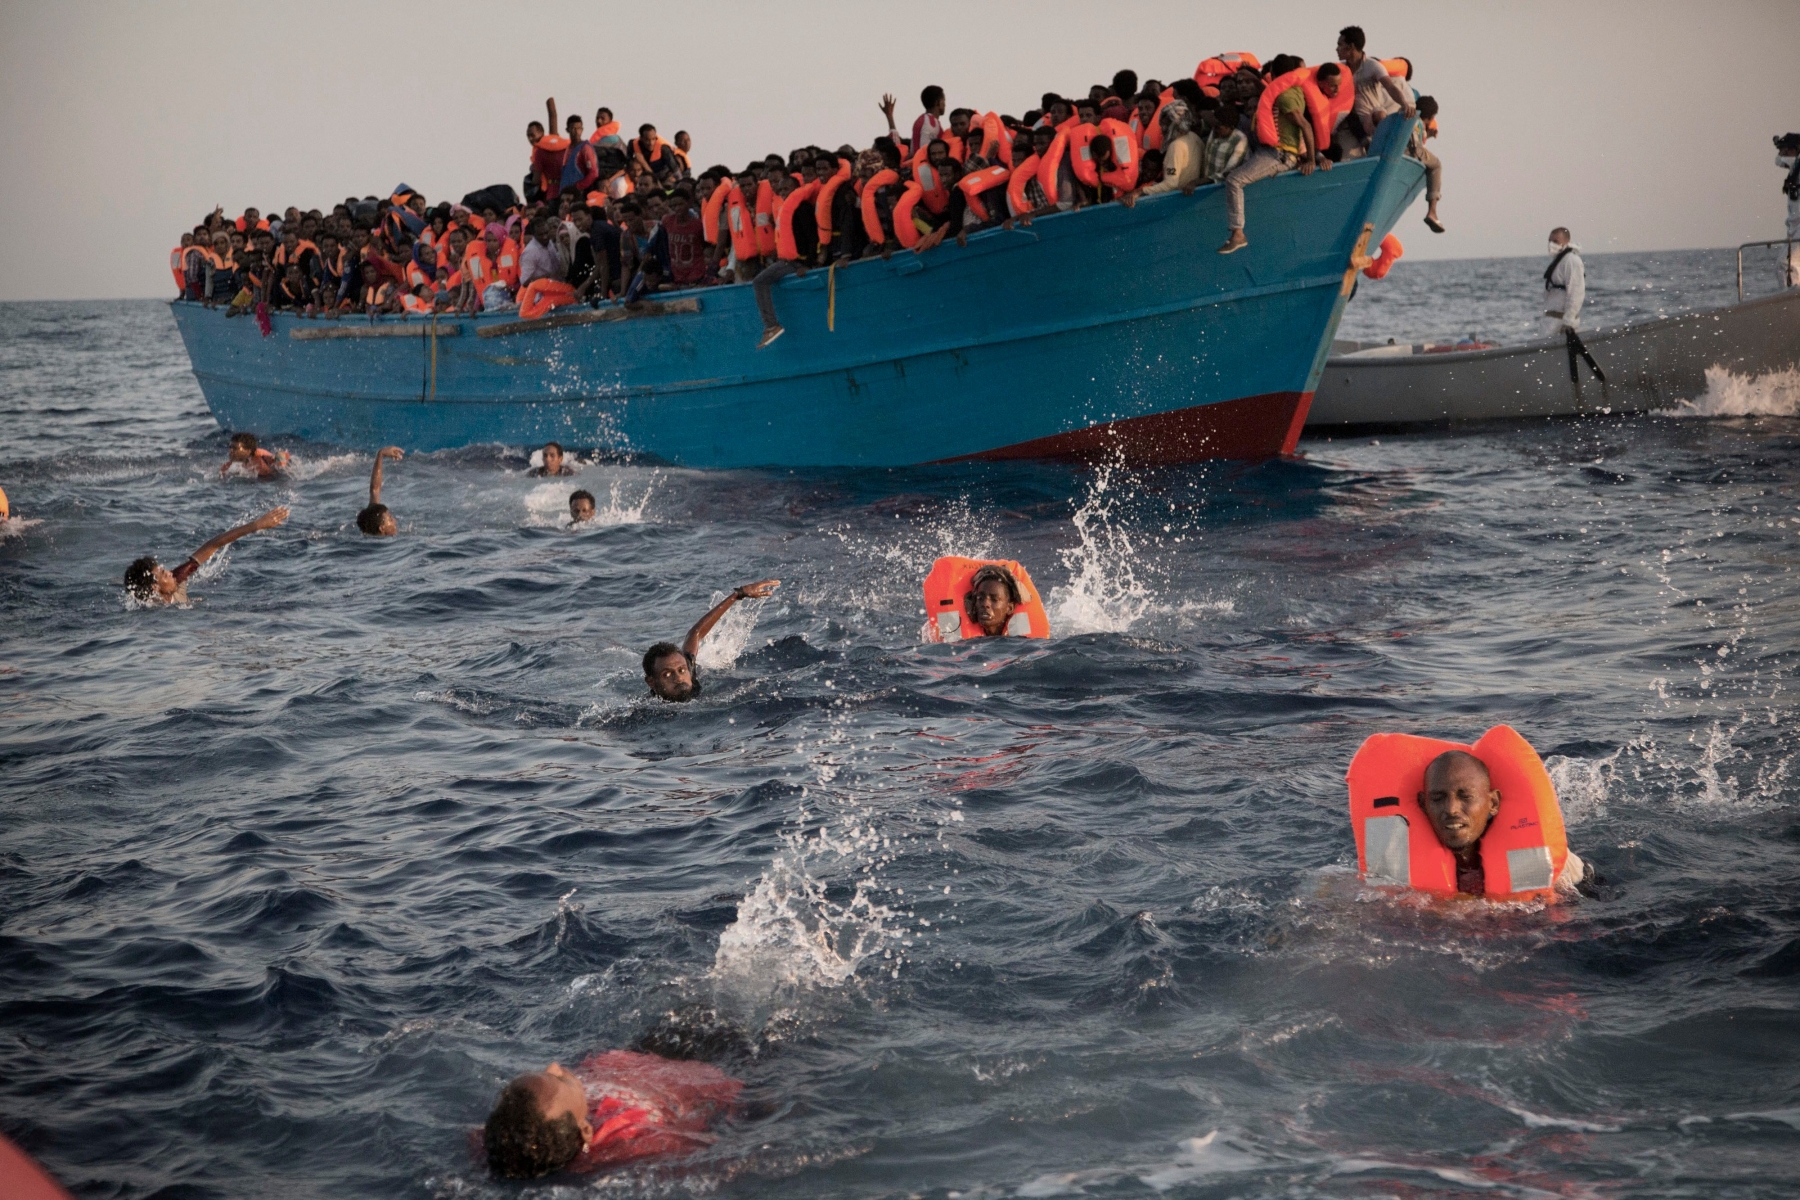 Migrants, most of them from Eritrea, jump into the water from a crowded wooden boat as they are helped by members of an NGO during a rescue operation at the Mediterranean sea, about 13 miles north of Sabratha, Libya, Monday, Aug. 29, 2016. Thousands of migrants and refugees were rescued Monday morning from more than 20 boats by members of Proactiva Open Arms NGO before transferring them to the Italian cost guards and others NGO vessels operating at the zone.(AP Photo/Emilio Morenatti) APTOPIX EU Libya Migrants